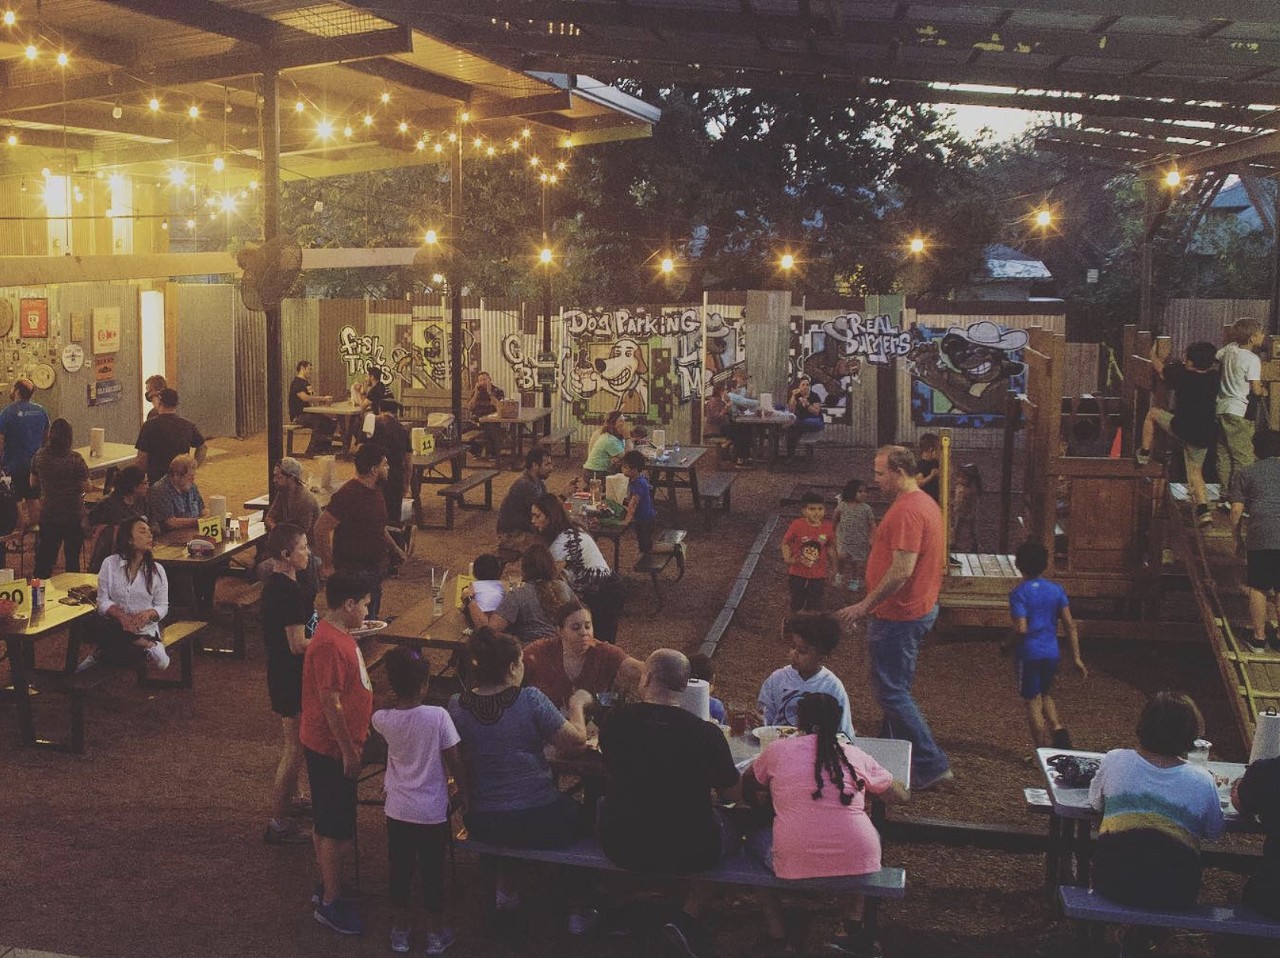 The Cove 
606 W Cypress St, (210) 227-2683, thecove.us 
The Cove has long been an outdoor haven for San Antonians, and for good reason. Its spacious patio accommodates those looking to enjoy the weather, plus it has a play area with plenty of room for kids to have a blast. Be sure to check out the Texas bar, which offers over 40 Texas craft brews.